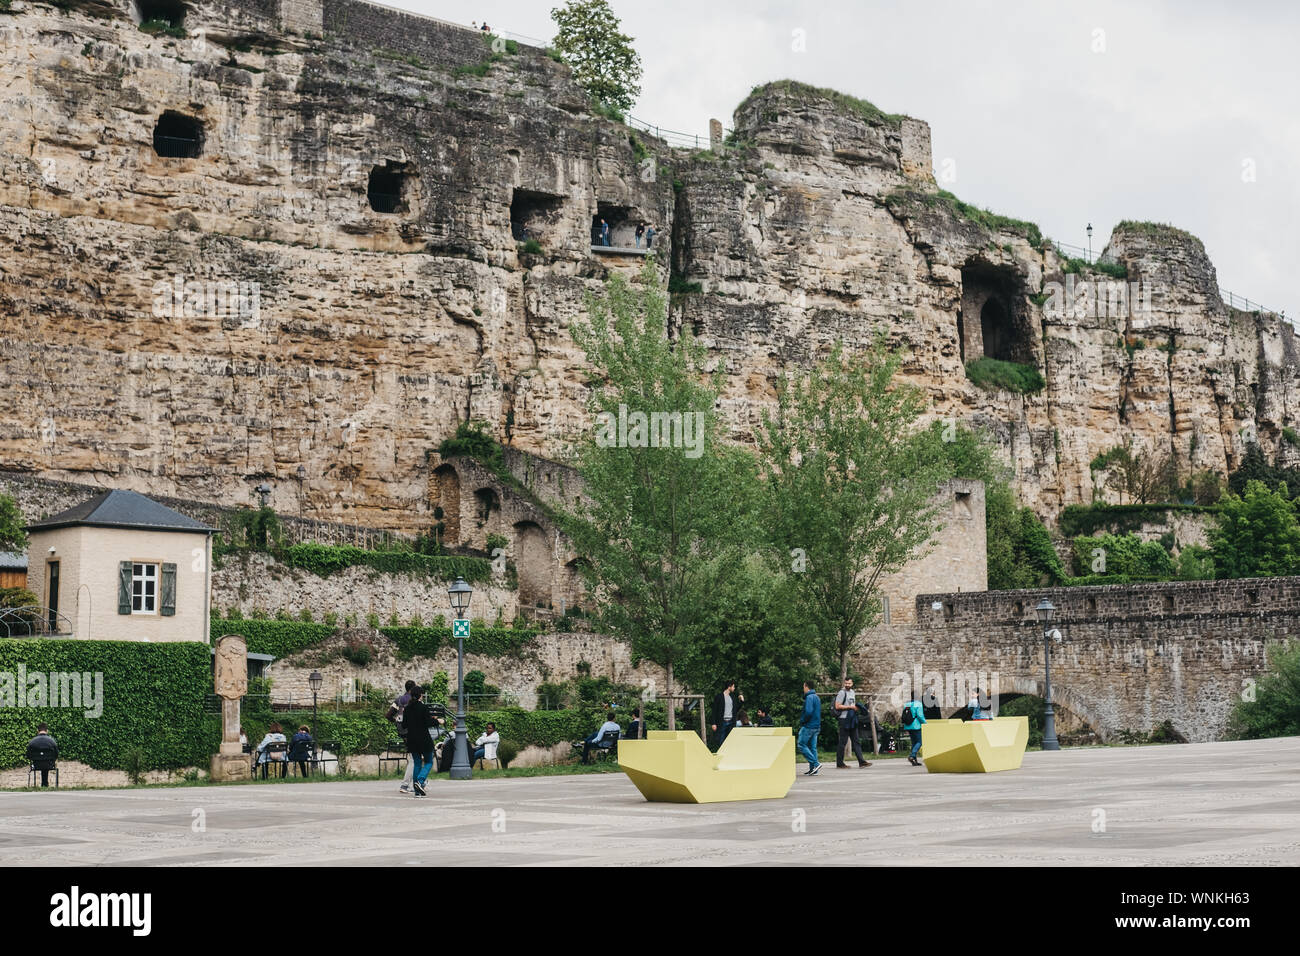 Luxembourg City,Luxembourg - May 19, 2019: People walking in Old Town of Luxembourg, Bock Casemates, a vast complex of underground tunnels & galleries Stock Photo